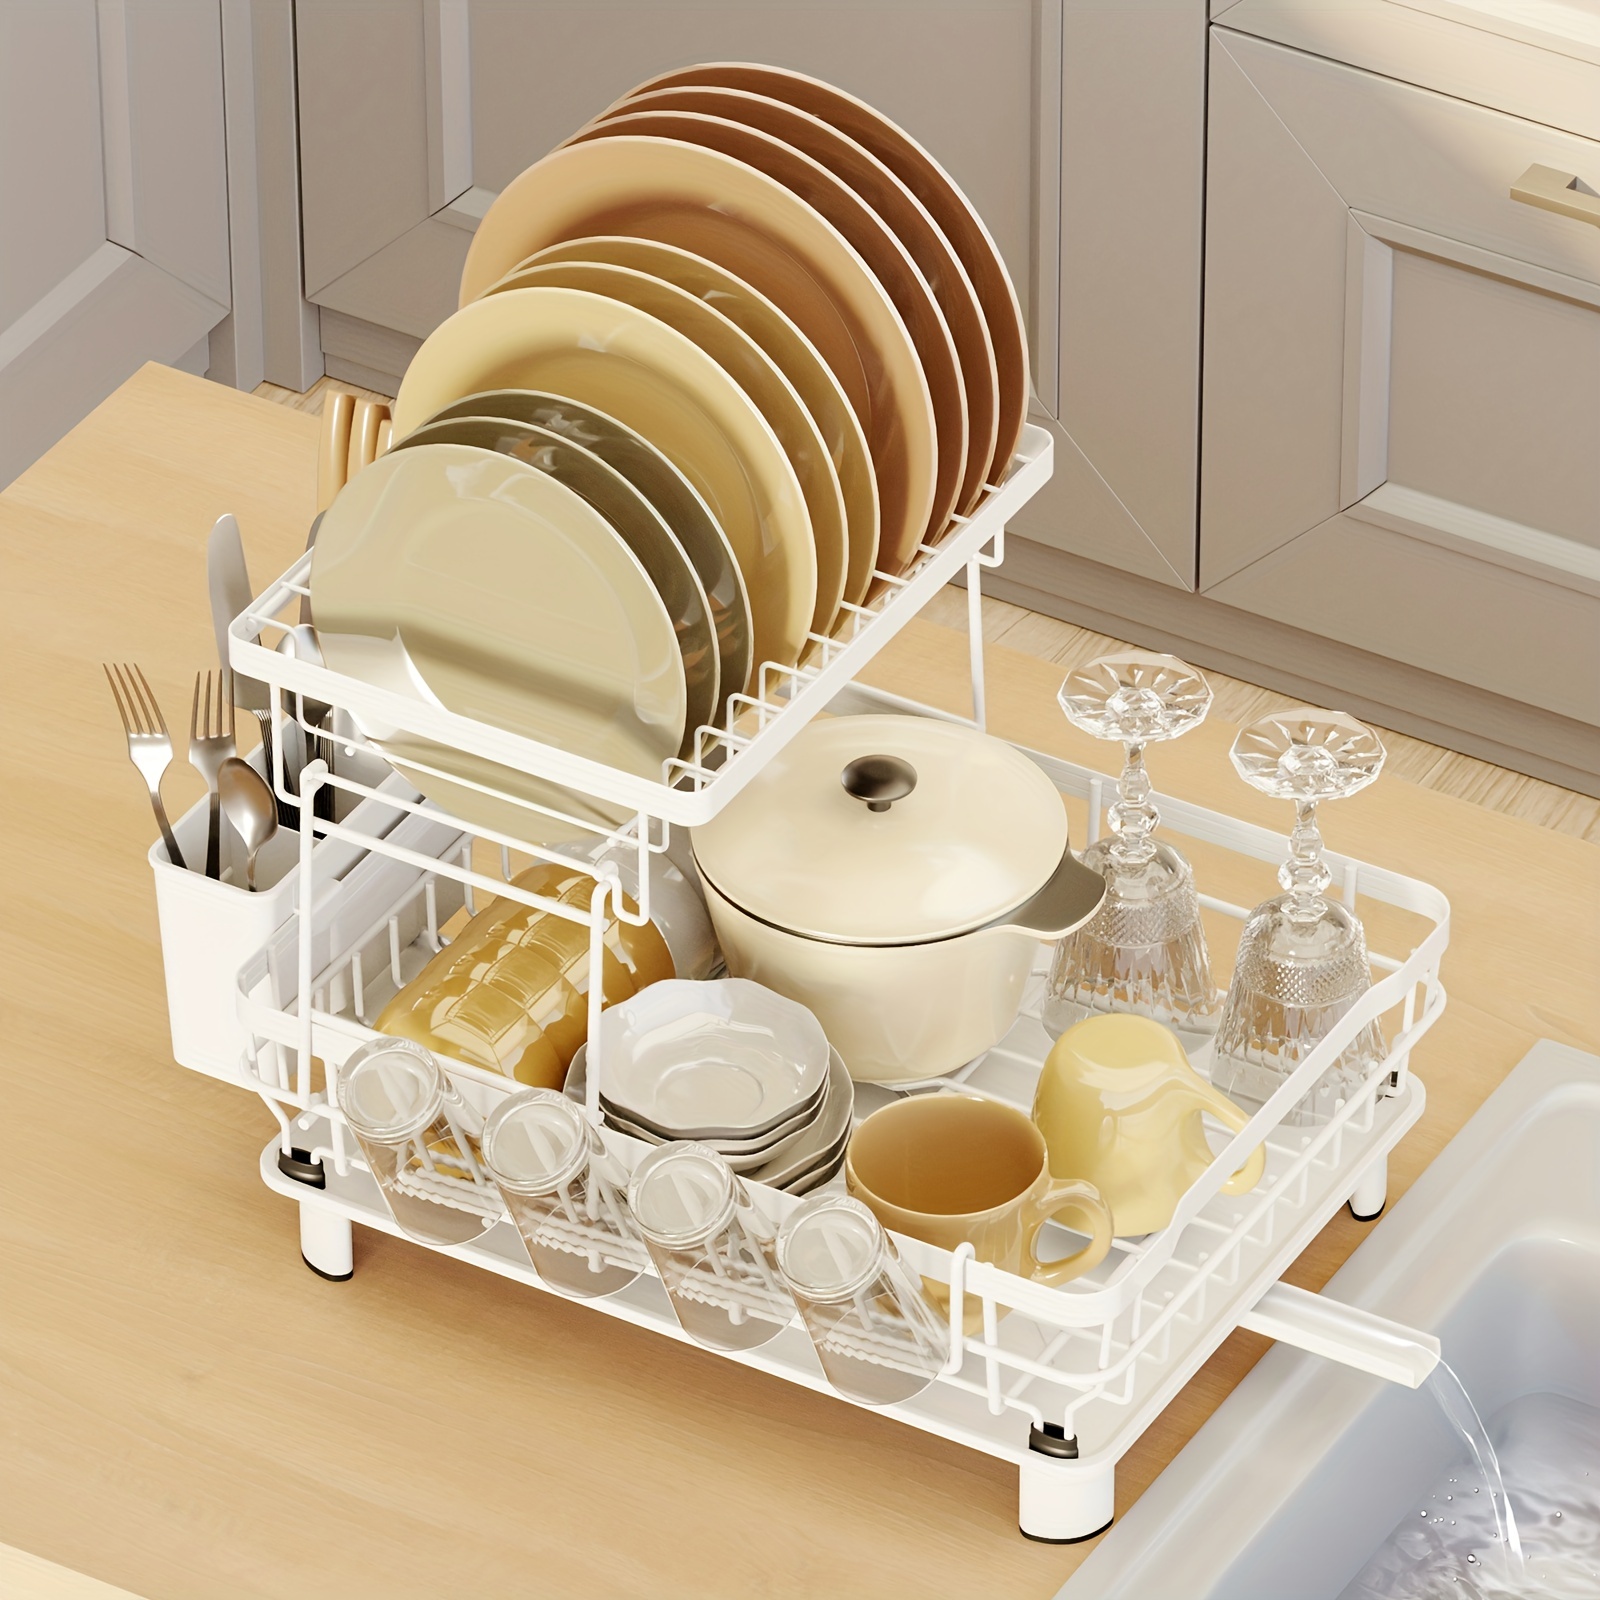 2 Tier Dish Drainer, Dish Drying Rack with Drip Tray, Dish Drainer Rack  with Drainboard and Utensil Holder (White)